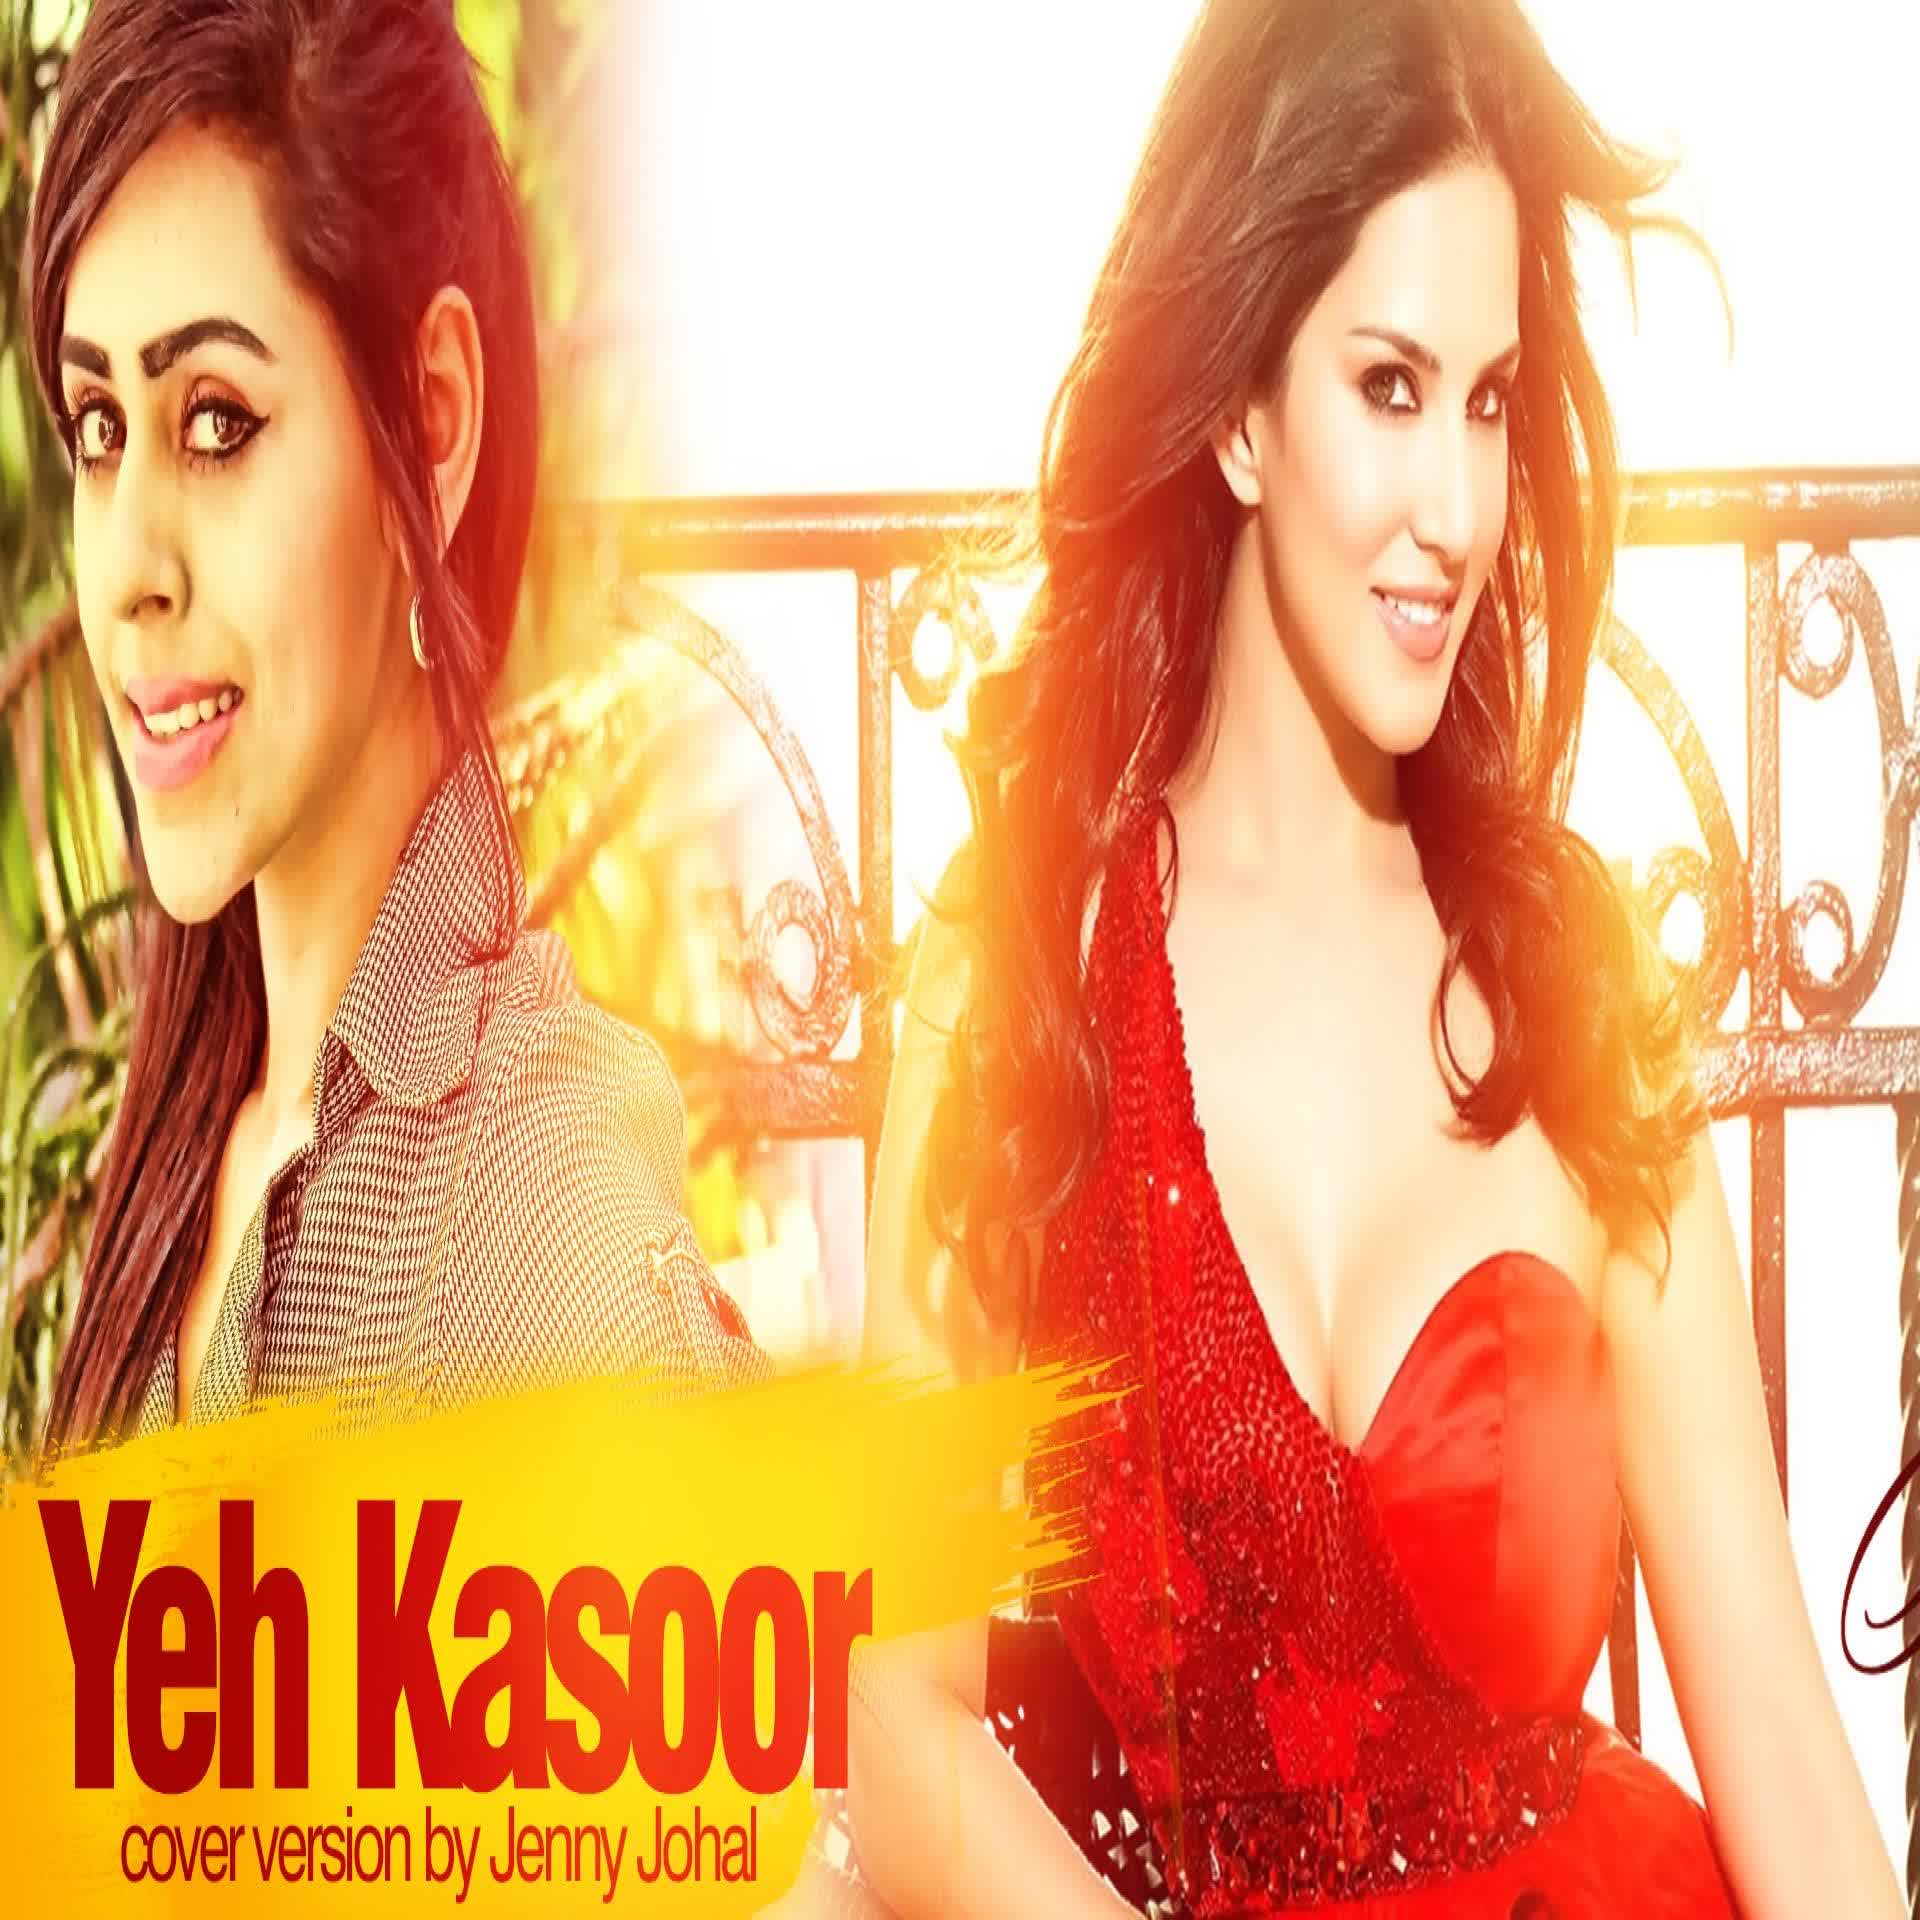 Yeh Kasoor (Cover) Jenny Johal   Mp3 song download